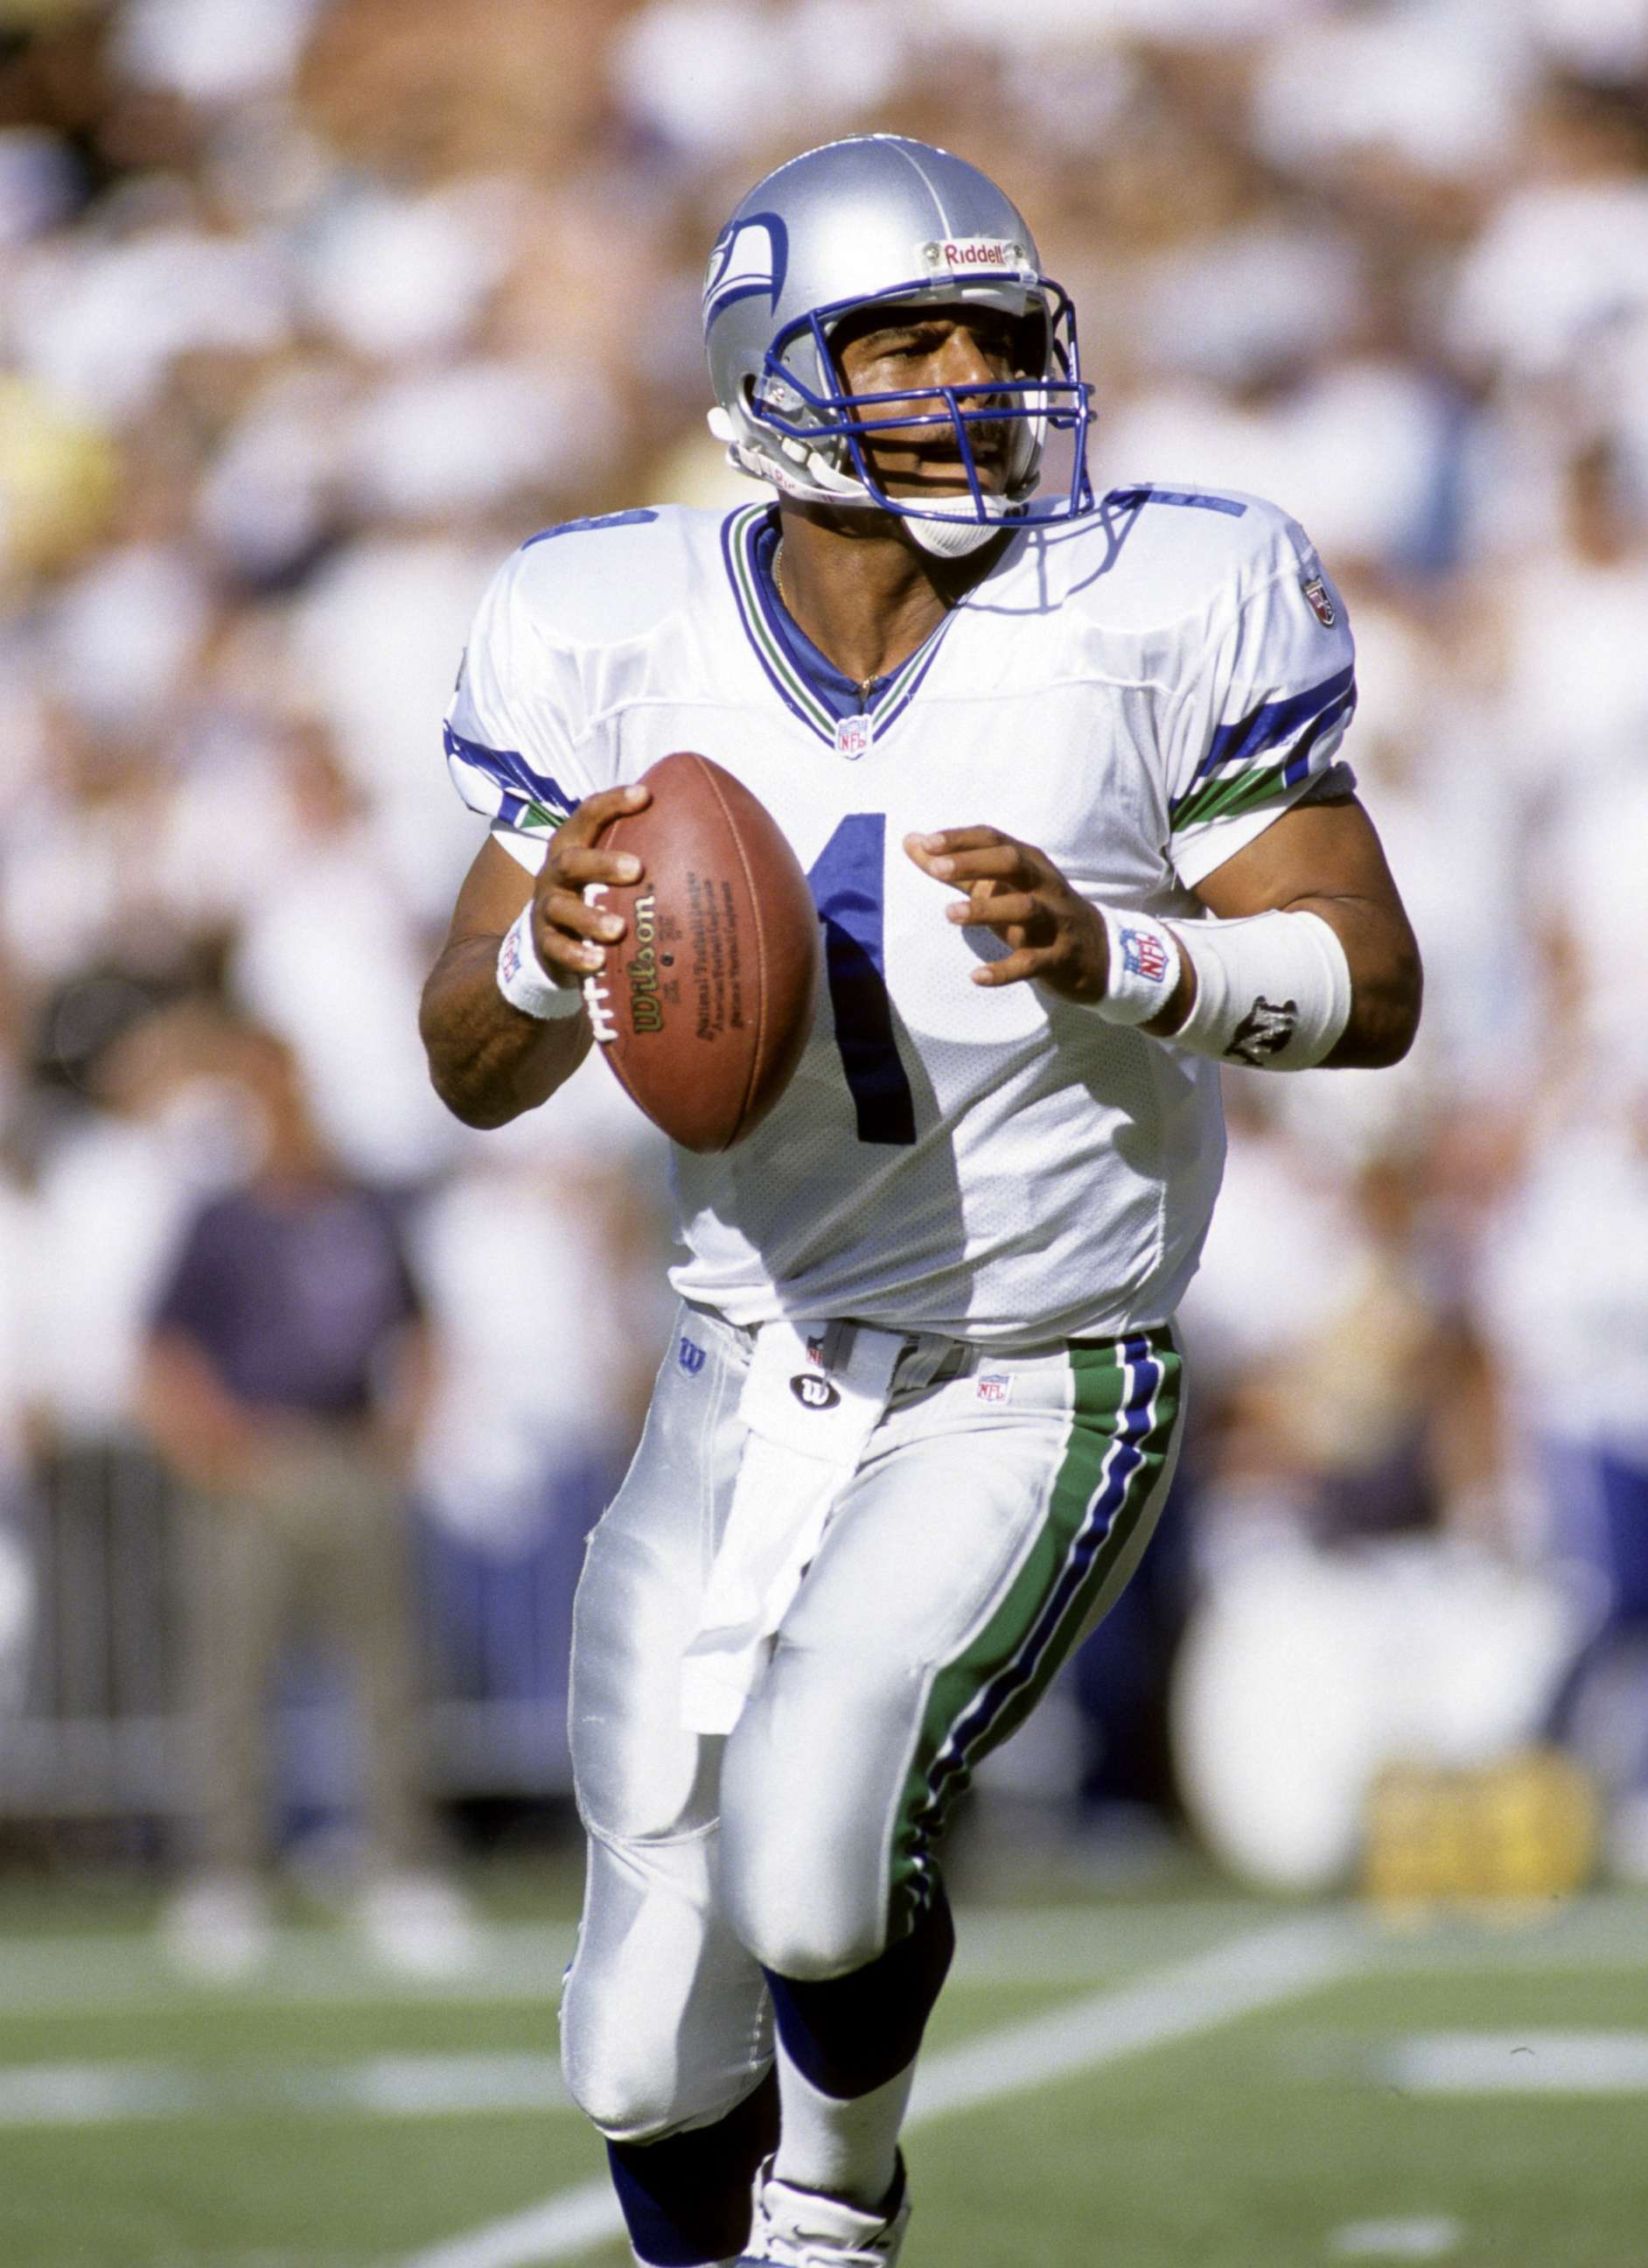 PHOTO: In this Nov. 9, 1997, file photo, Hall of Fame quarterback Warren Moon of the Seattle Seahawks looks for an open receiver during a 37-31 victory over the San Diego Chargers, at Qualcomm Stadium in San Diego, Calif.